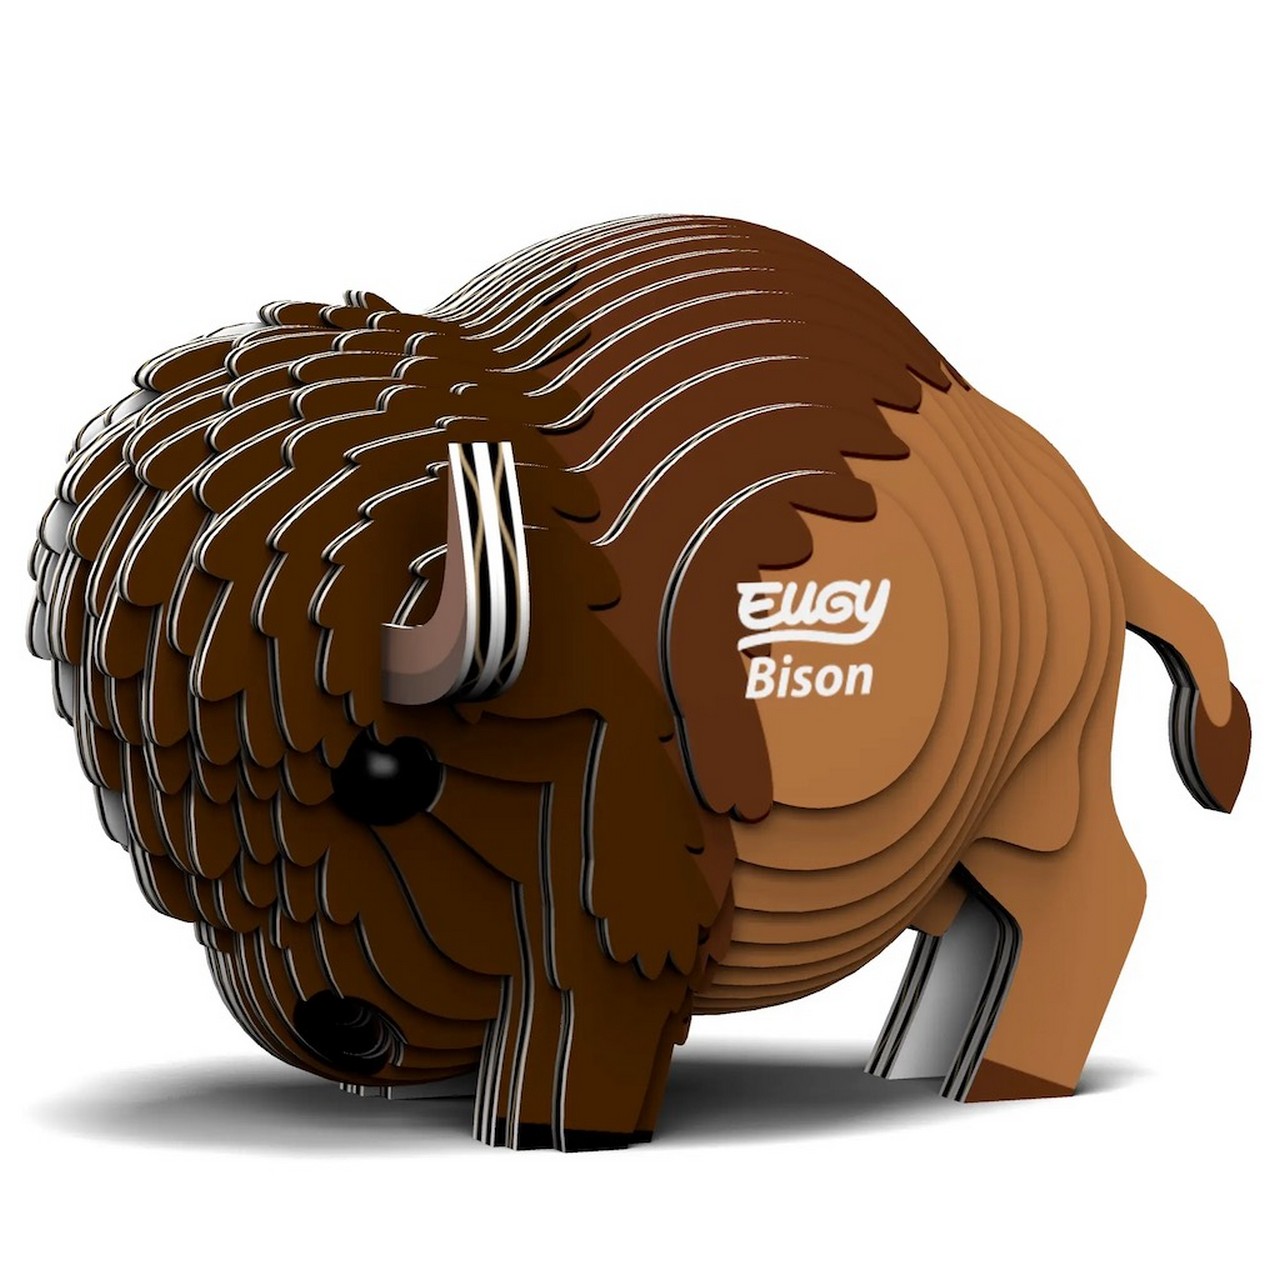 Bison Eugy 3D Puzzle Kit Exclusive at the Nut House